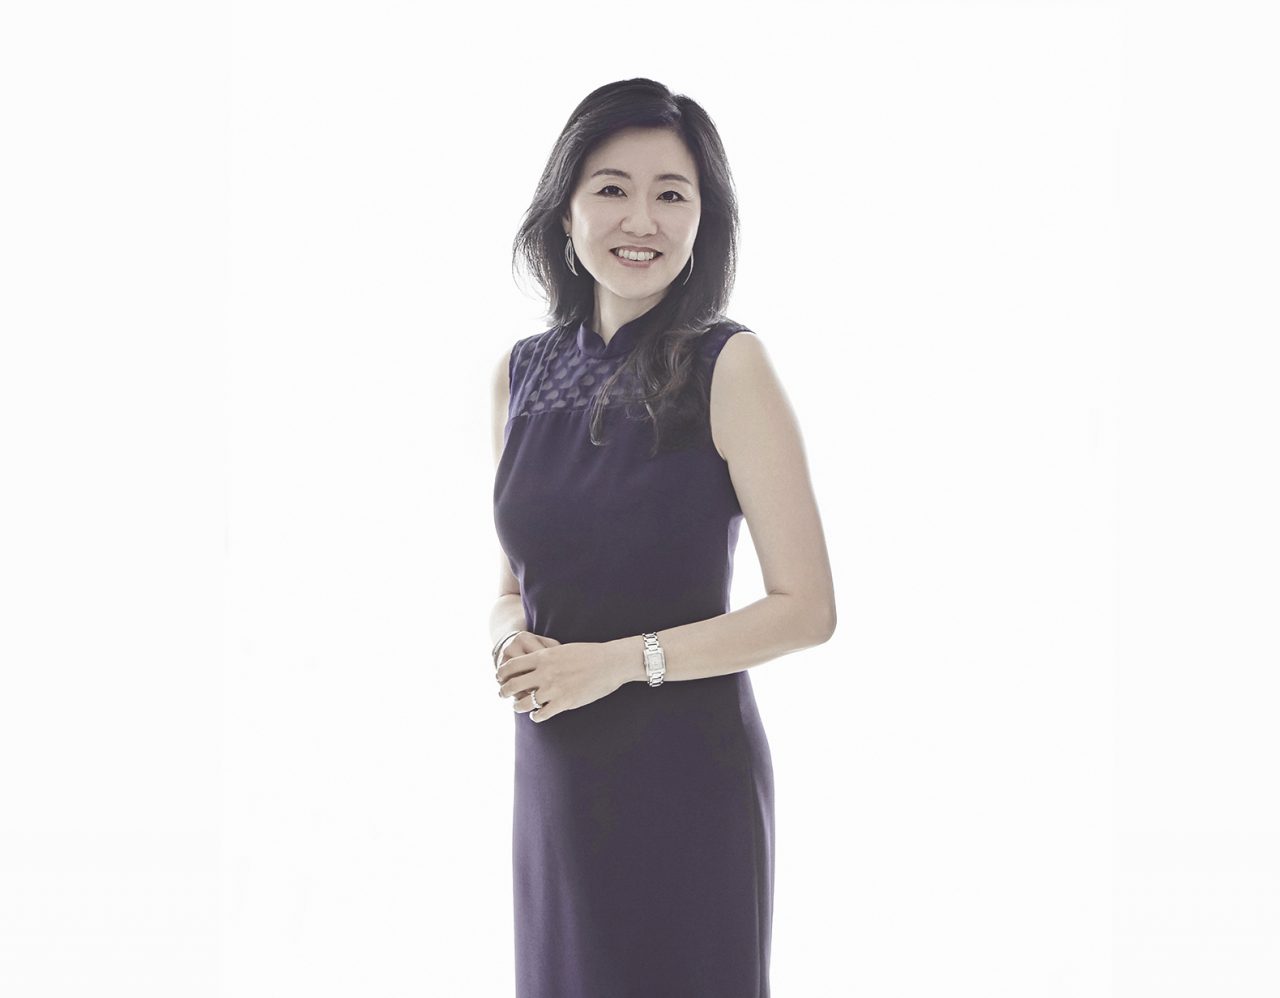 Interview: Jeannie Cho Lee MW on her life's work of educating Asian palates  - SilverKris